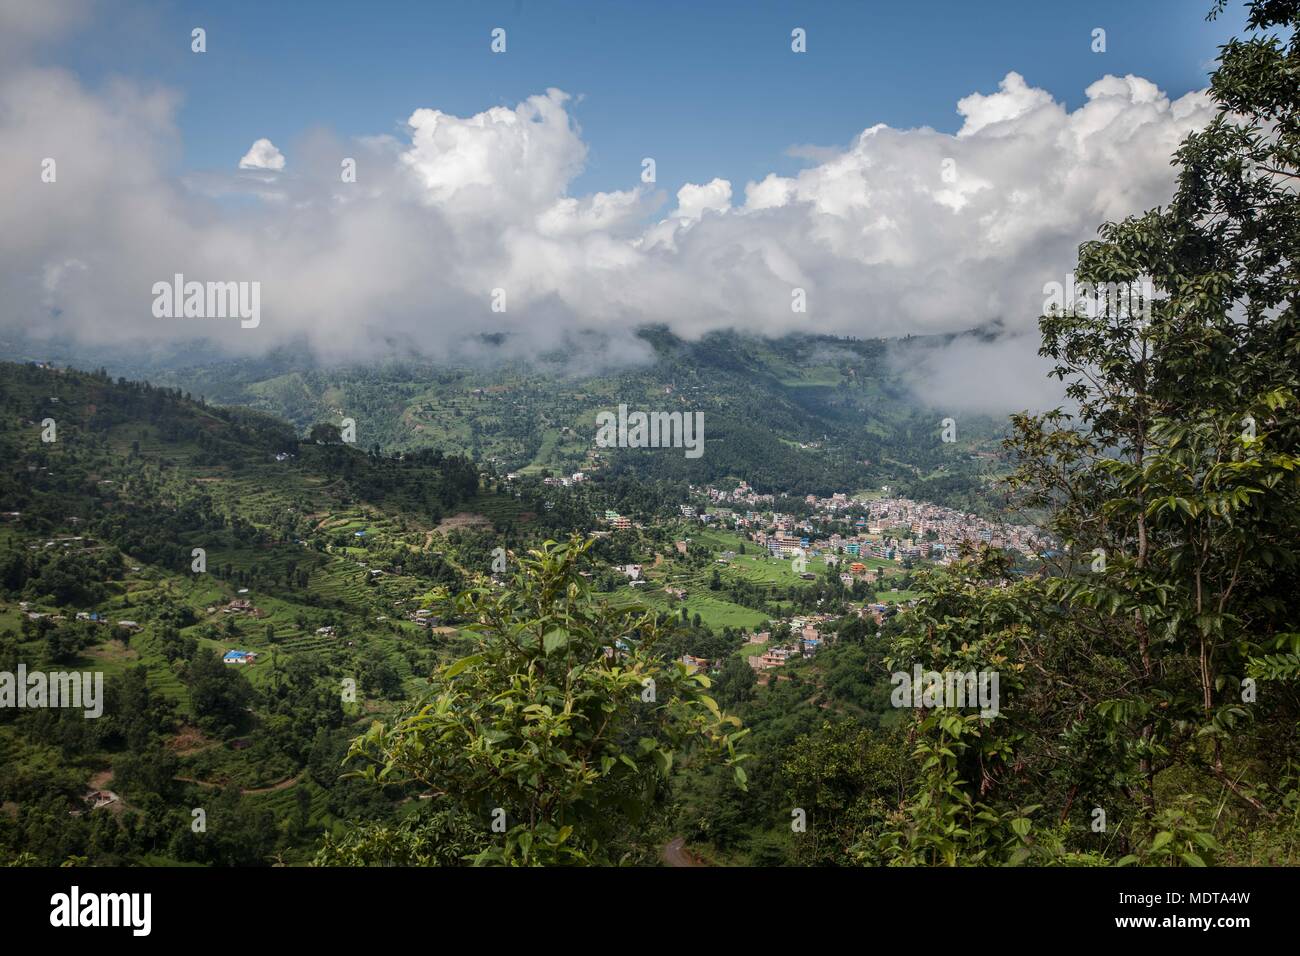 Wide landscape shot of steep, stepped rice terraces and communities in the Dhading District of Nepal Stock Photo